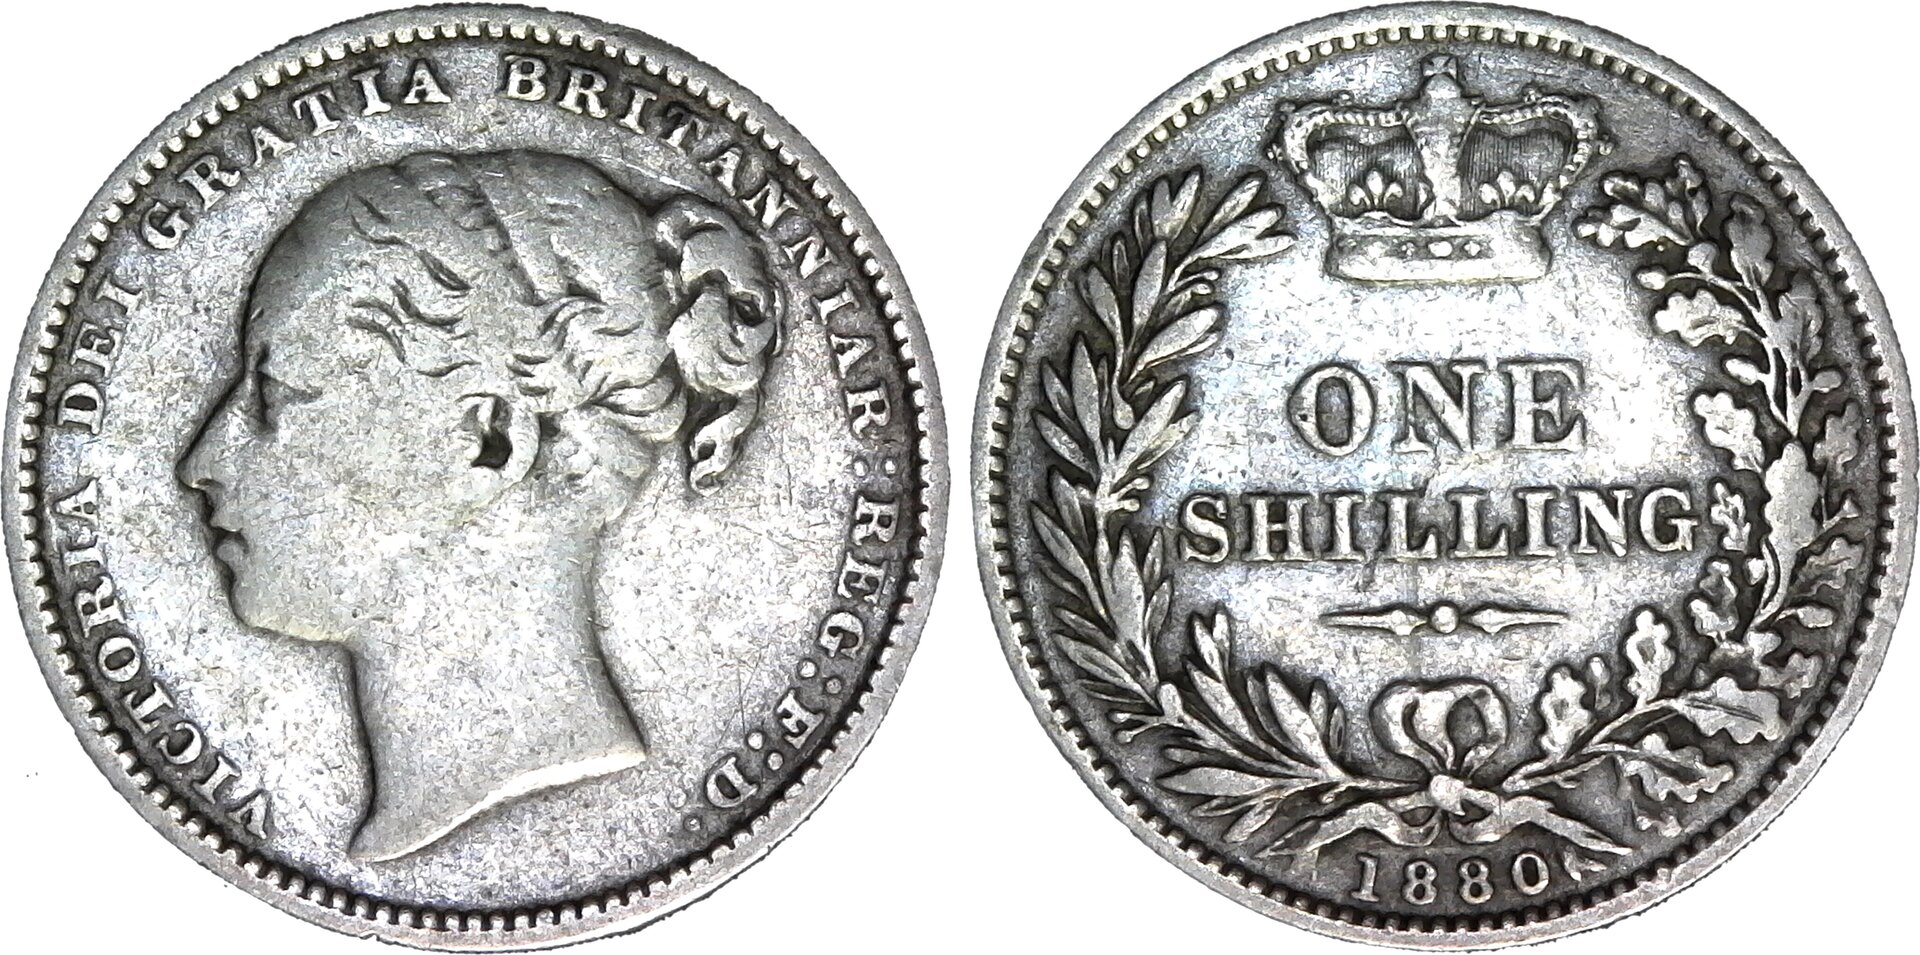 Great Britain Shilling 1880 obv-side-cutout.jpg